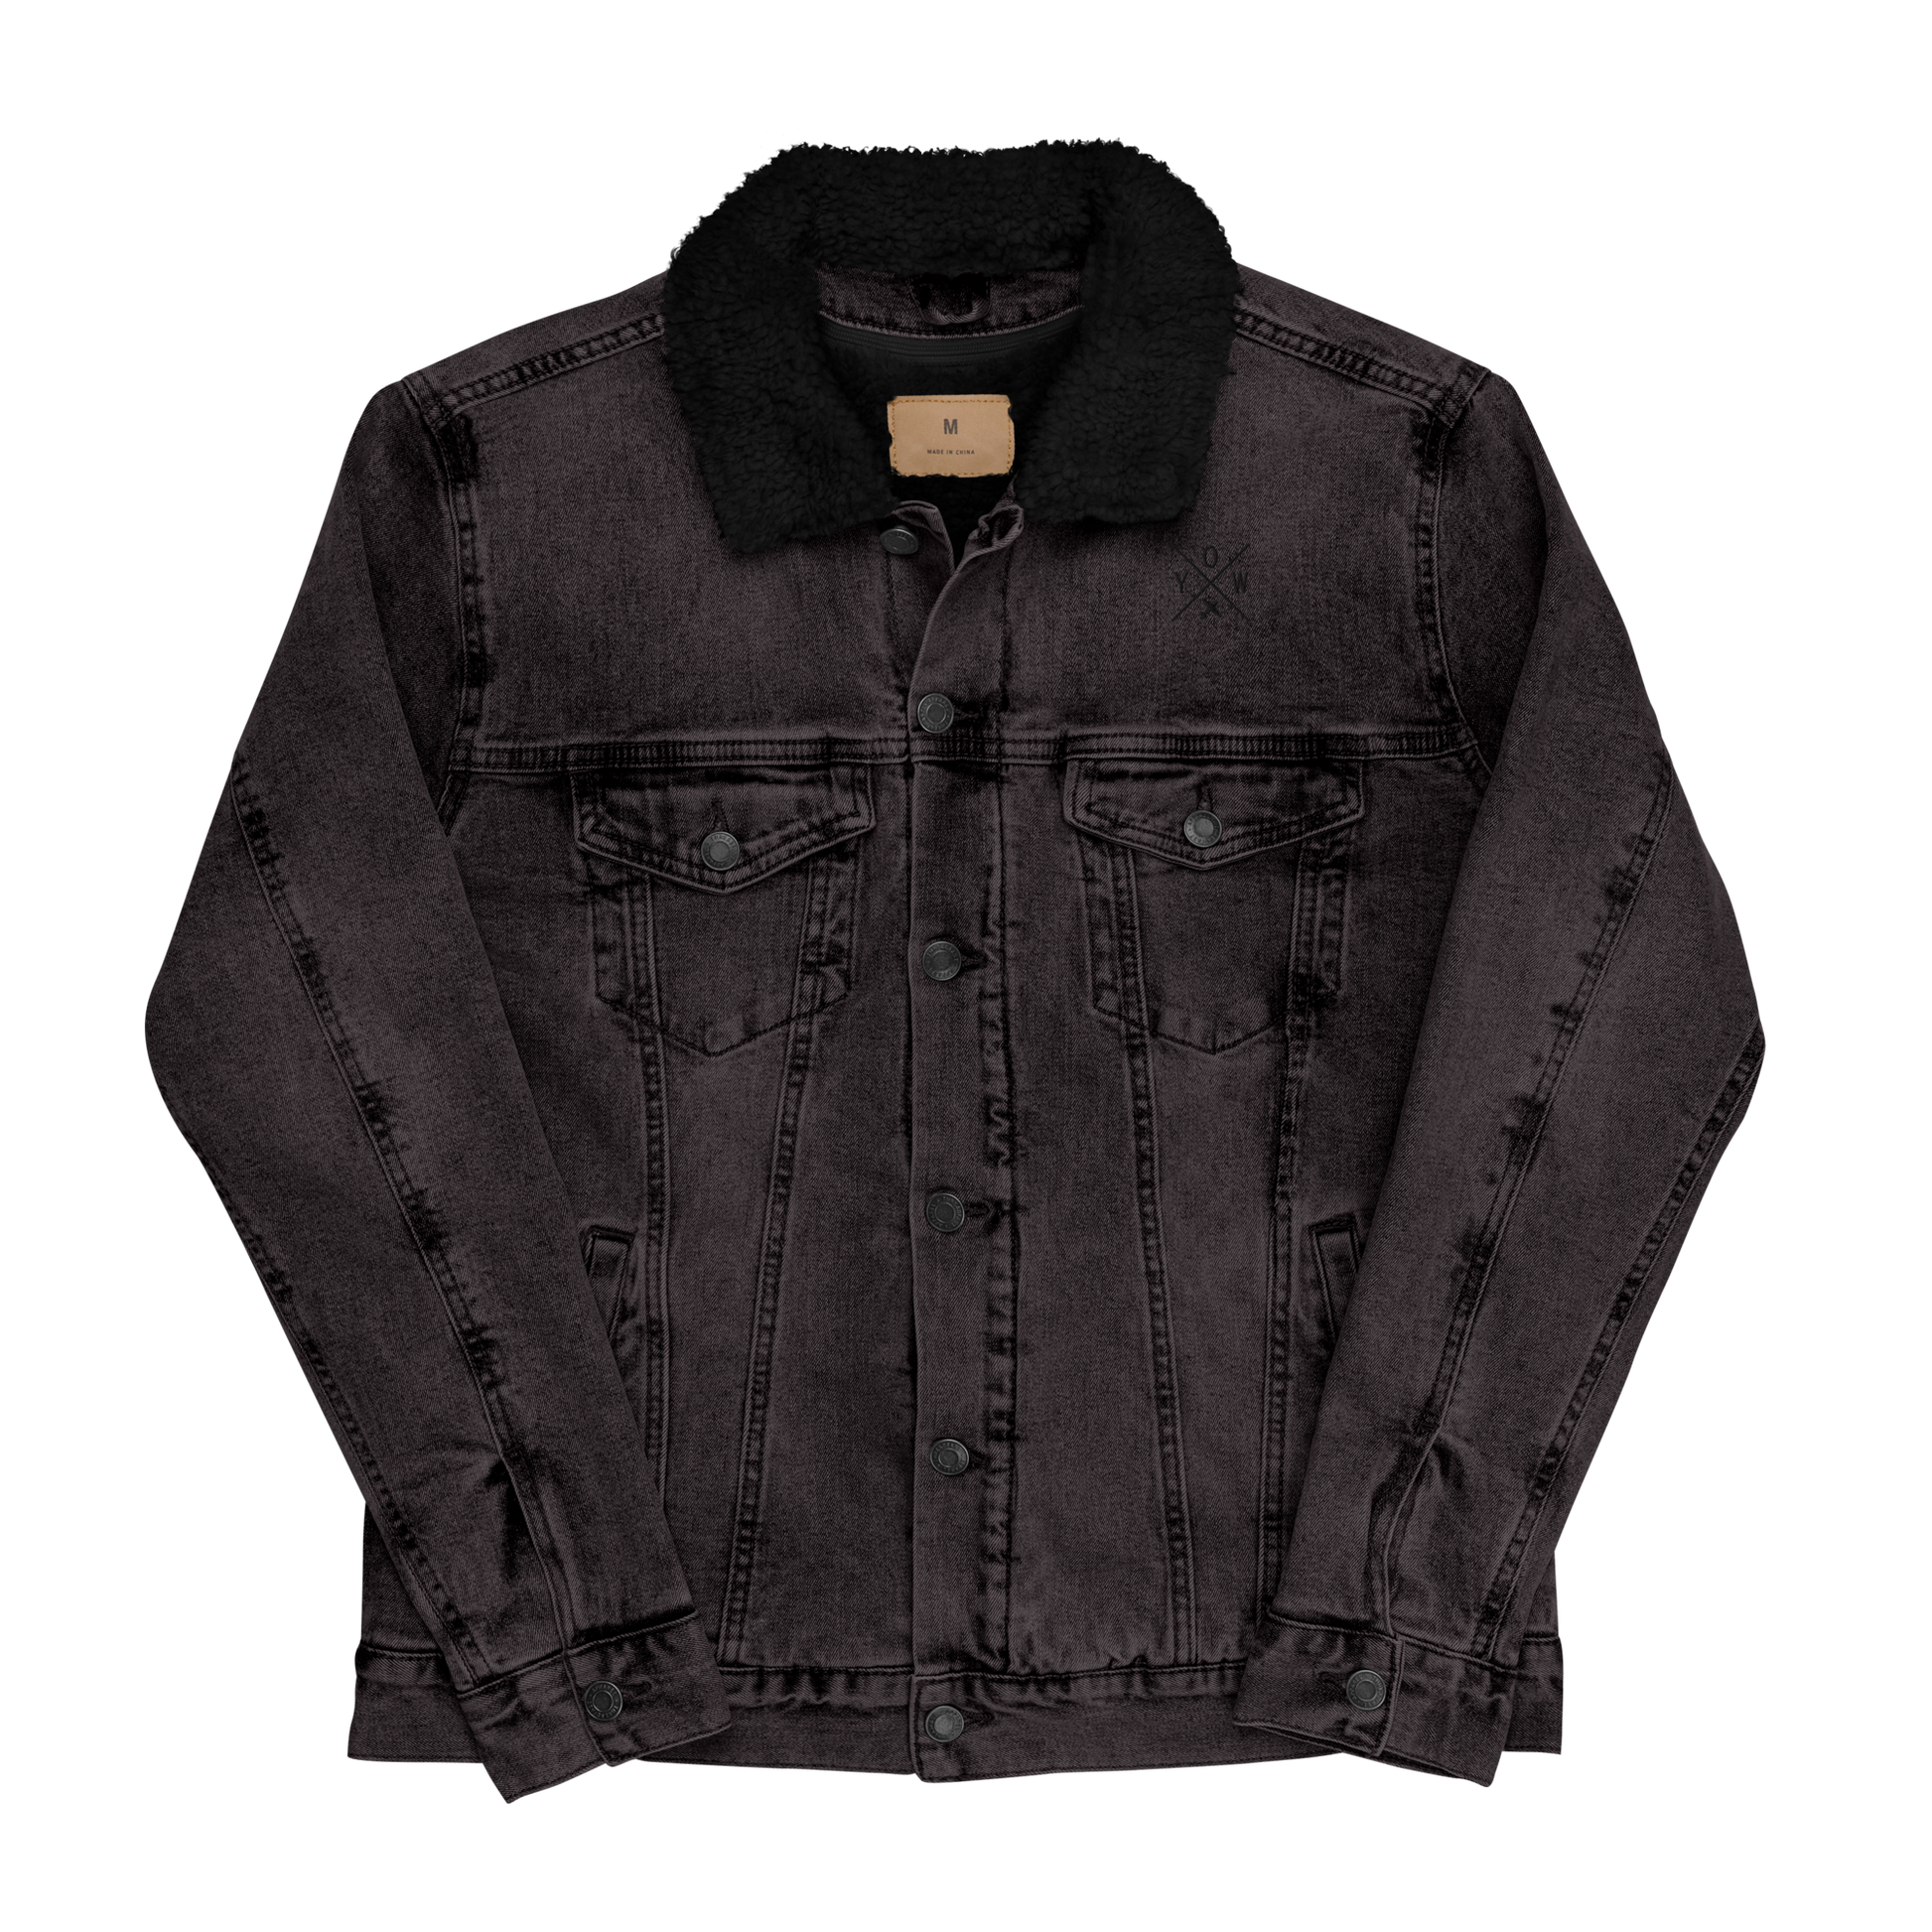 YHM Designs - YOW Ottawa Denim Sherpa Jacket - Crossed-X Design with Airport Code and Vintage Propliner - Black & White Embroidery - Image 02